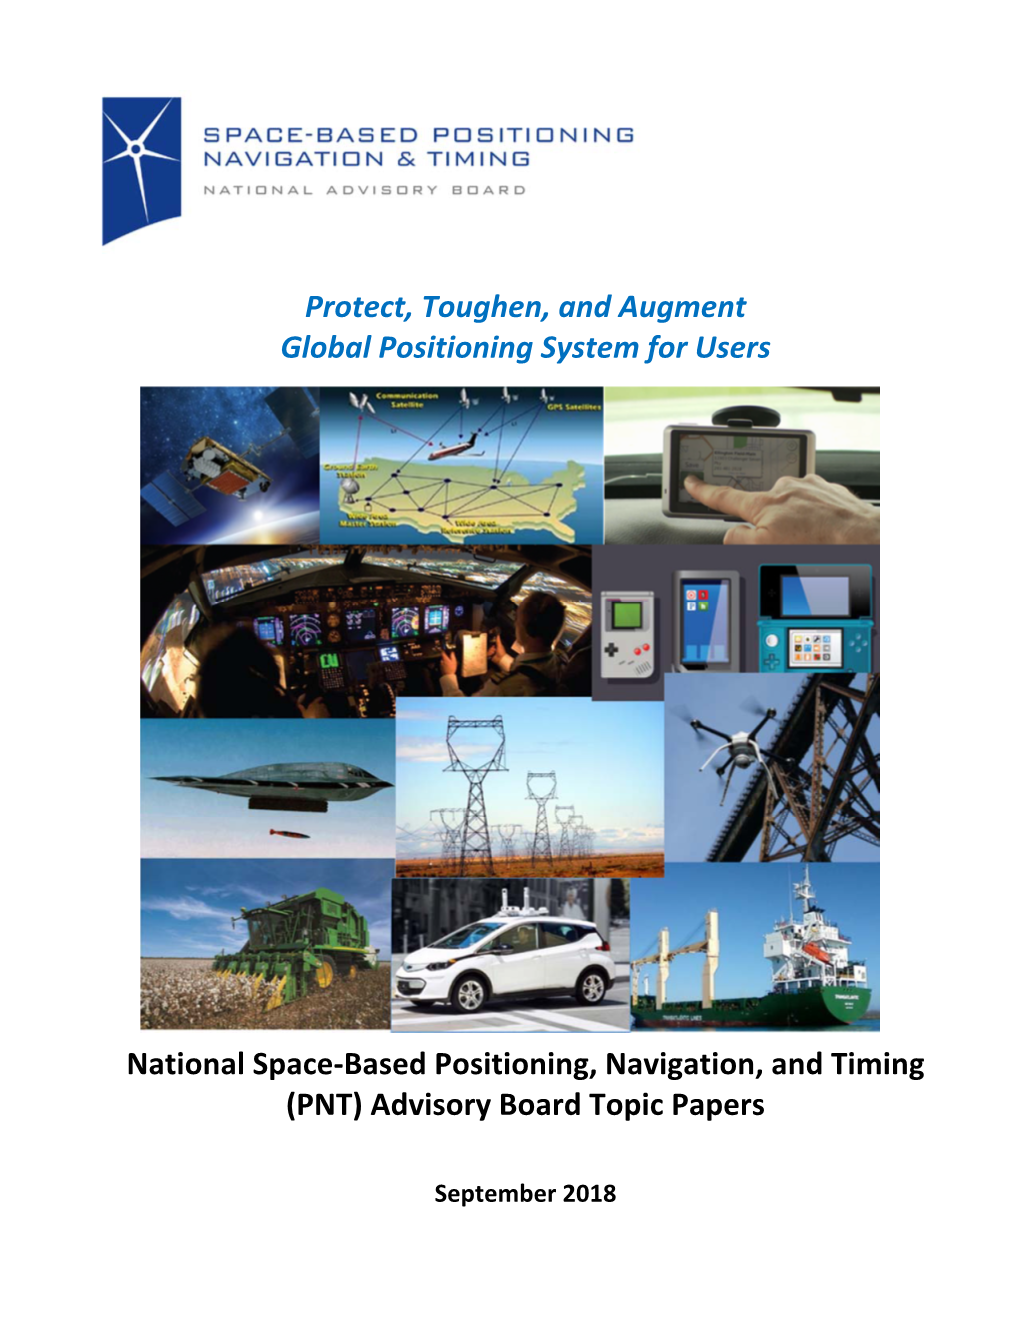 Protect, Toughen, and Augment: National Space‐Based Positioning, Navigation, and Timing (PNT) Advisory Board Topic Papers